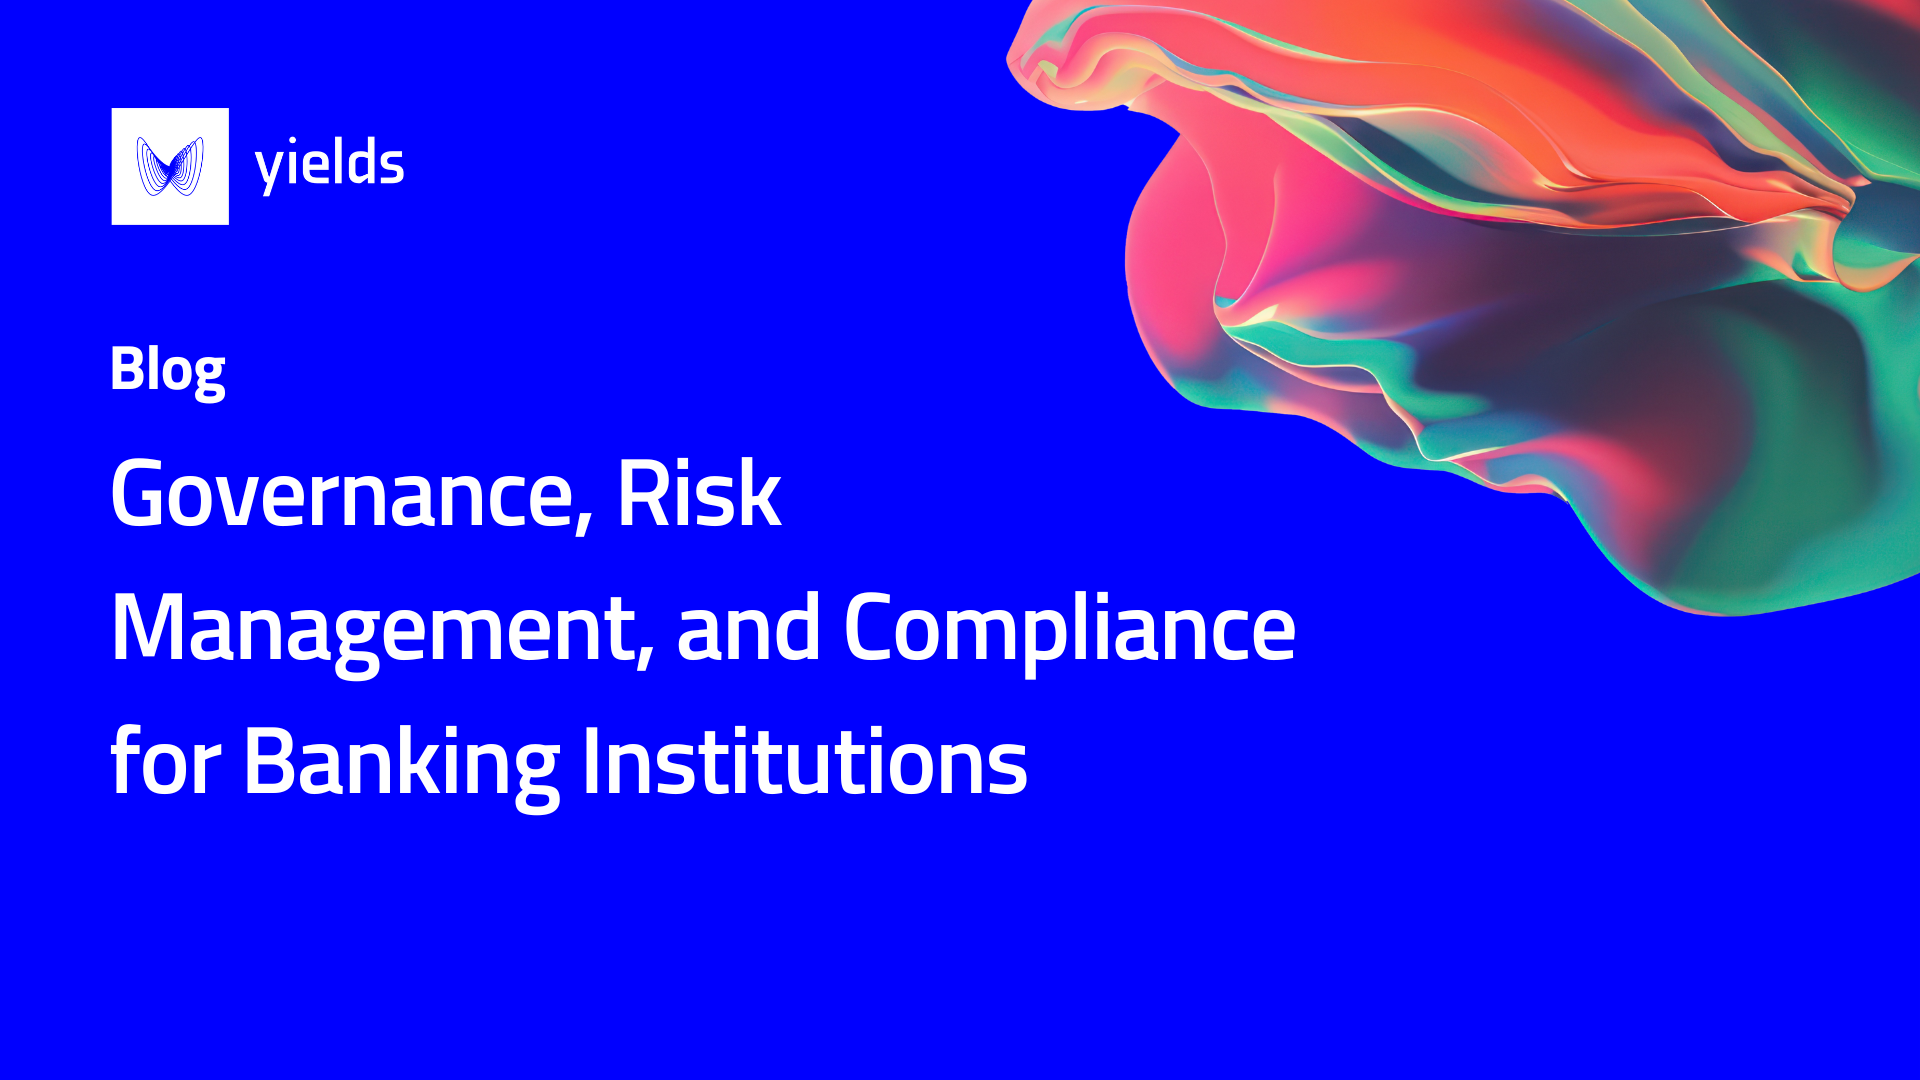 Governance, Risk Management, and Compliance for Banking Institutions